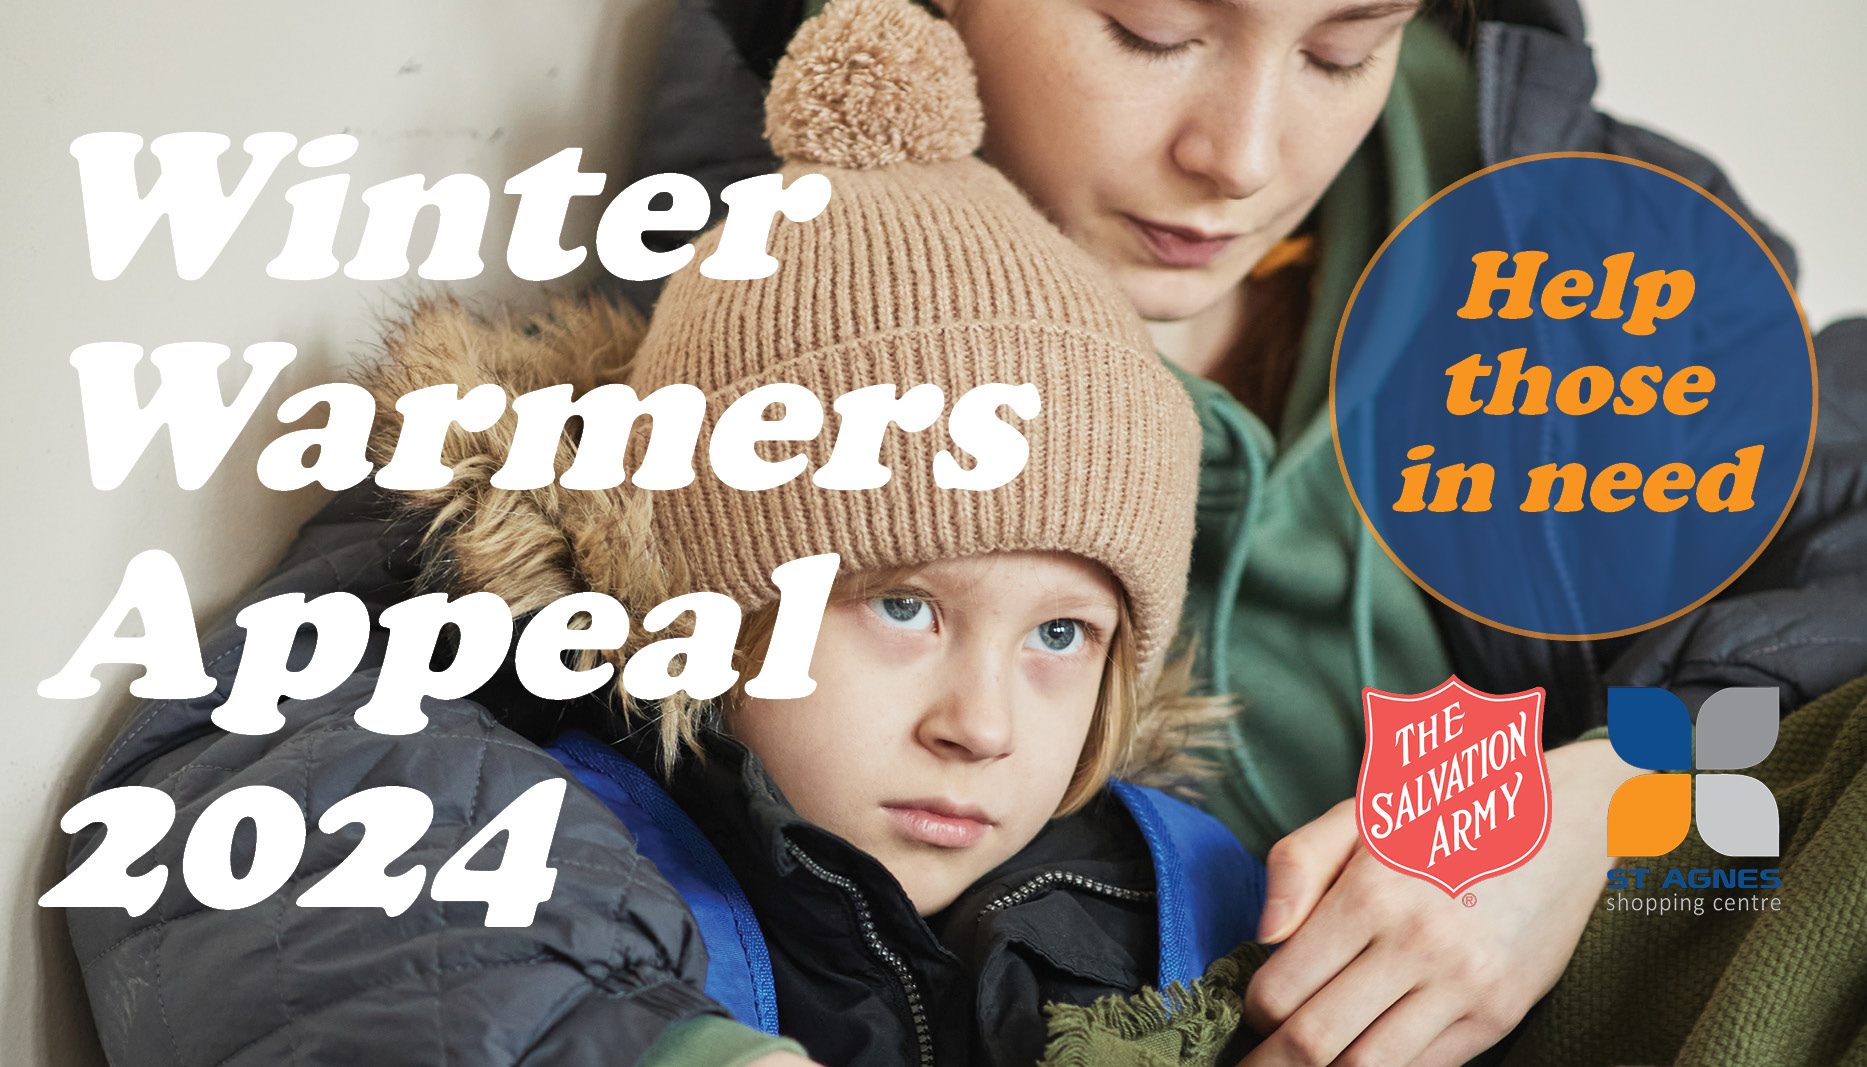 Help people in need this winter, donate new blankets and warm clothing to The Salvation Army, stationed at St Agnes Shopping Centre 27th to 31st May 2024